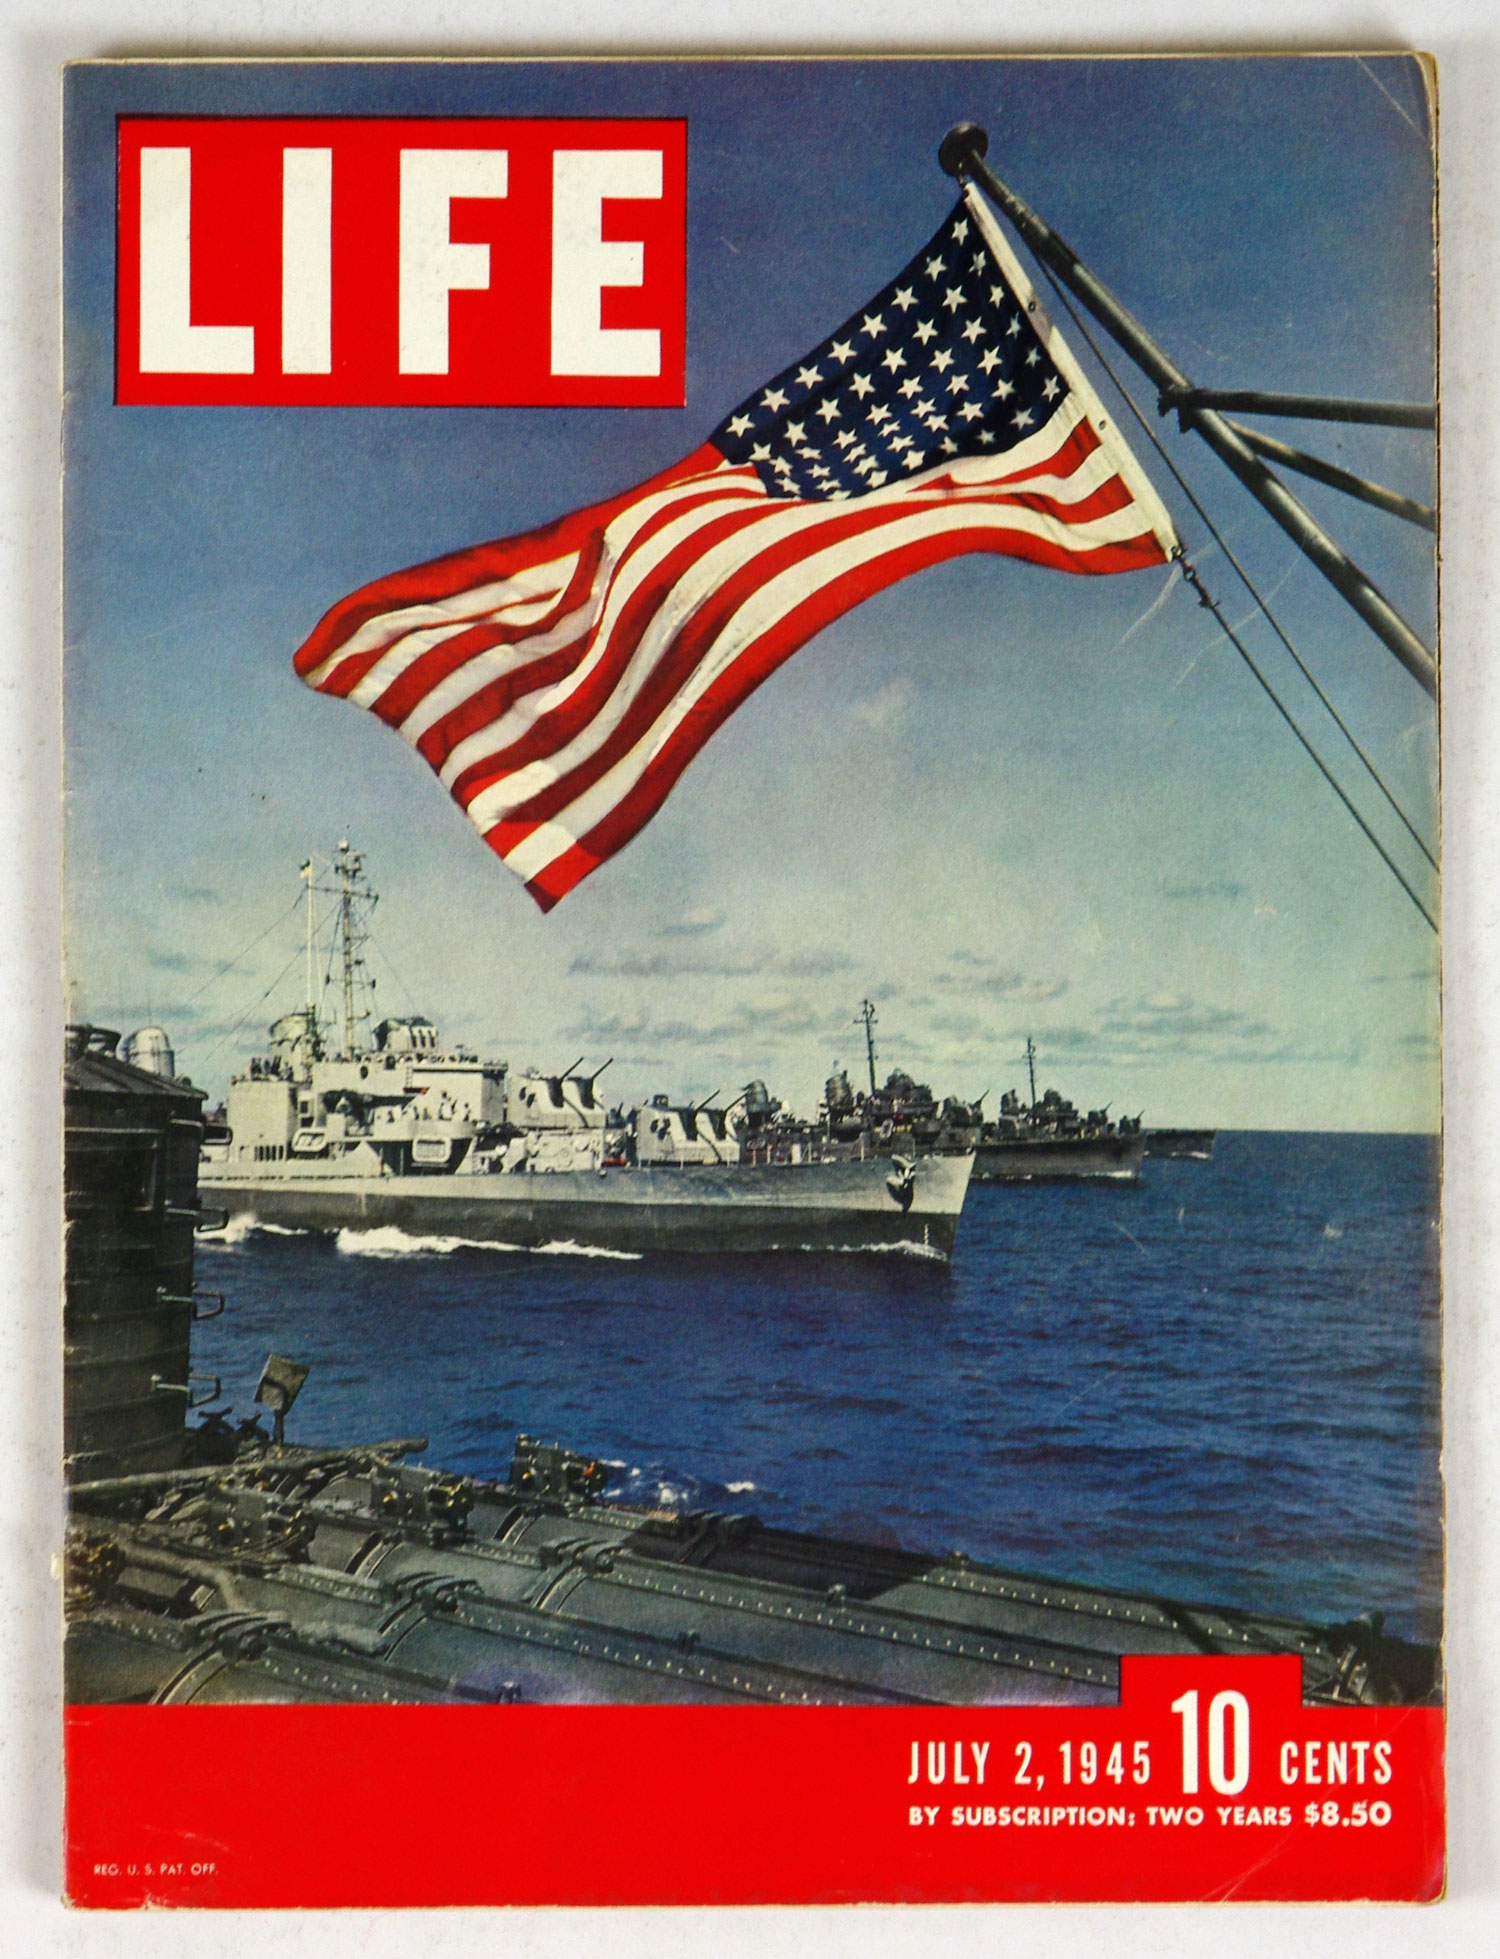 LIFE Magazine Back Issue 1945 July 2 American Flag with Navy Ships